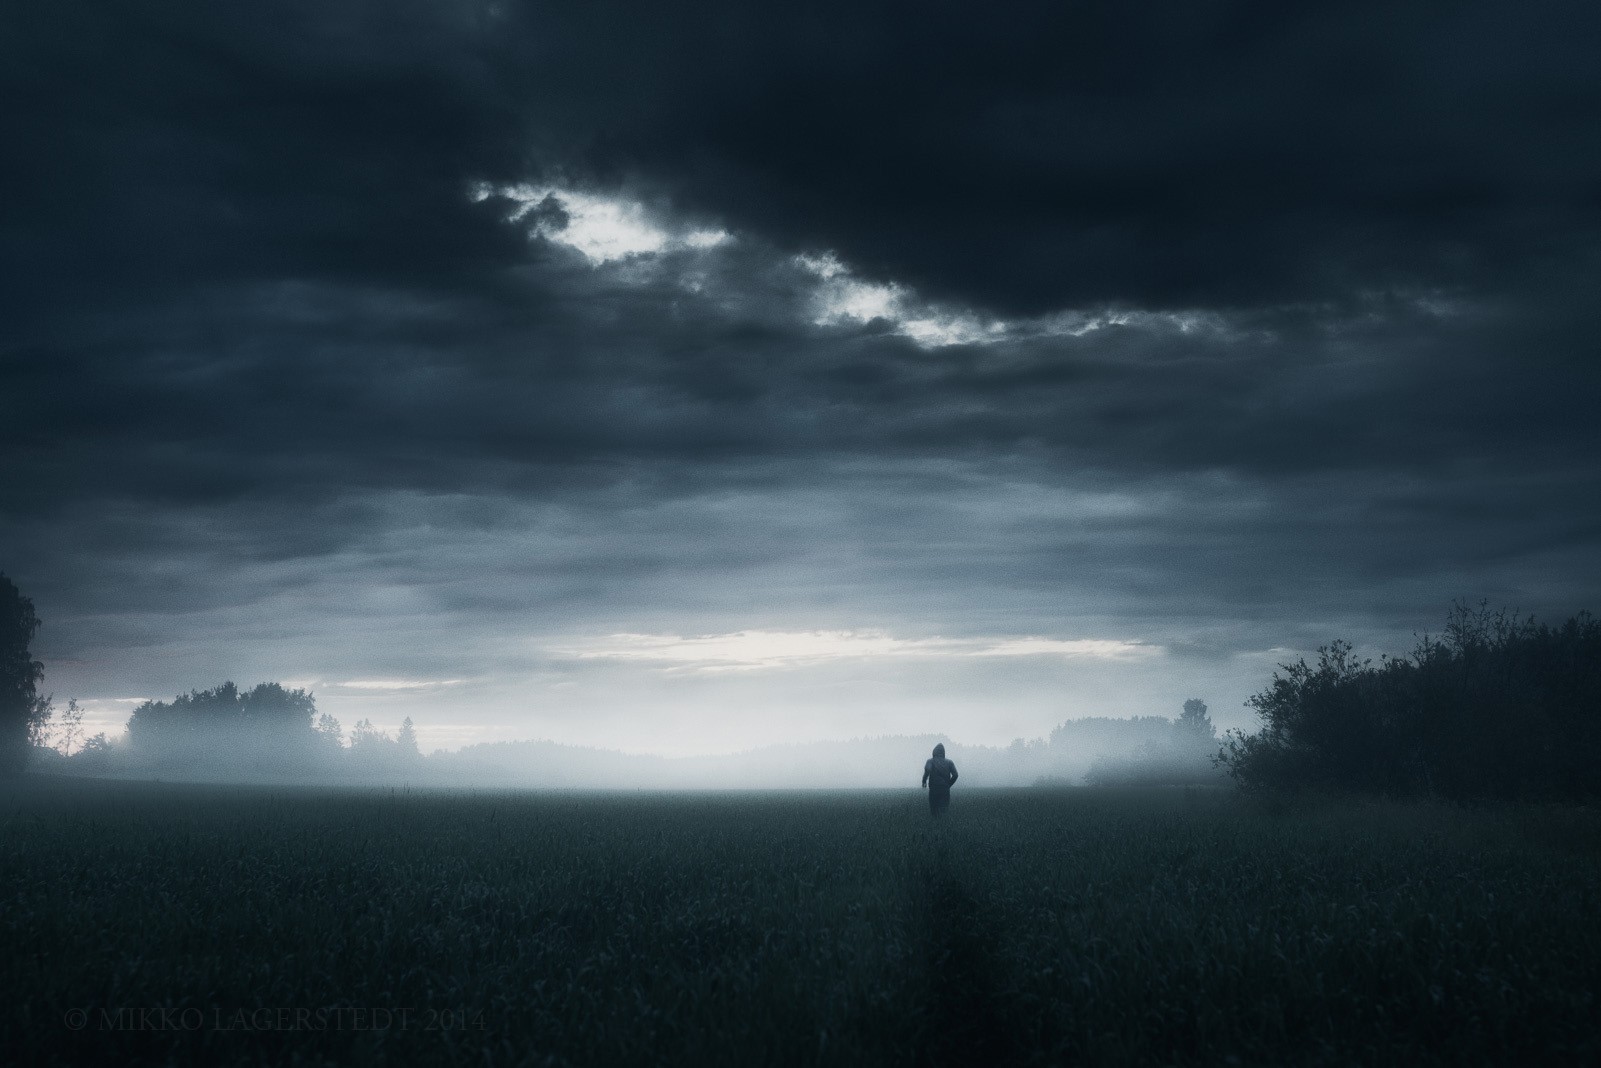 General 1601x1068 dark loneliness alone nature grass horizon rain sky clouds running people landscape solice gloomy Finland